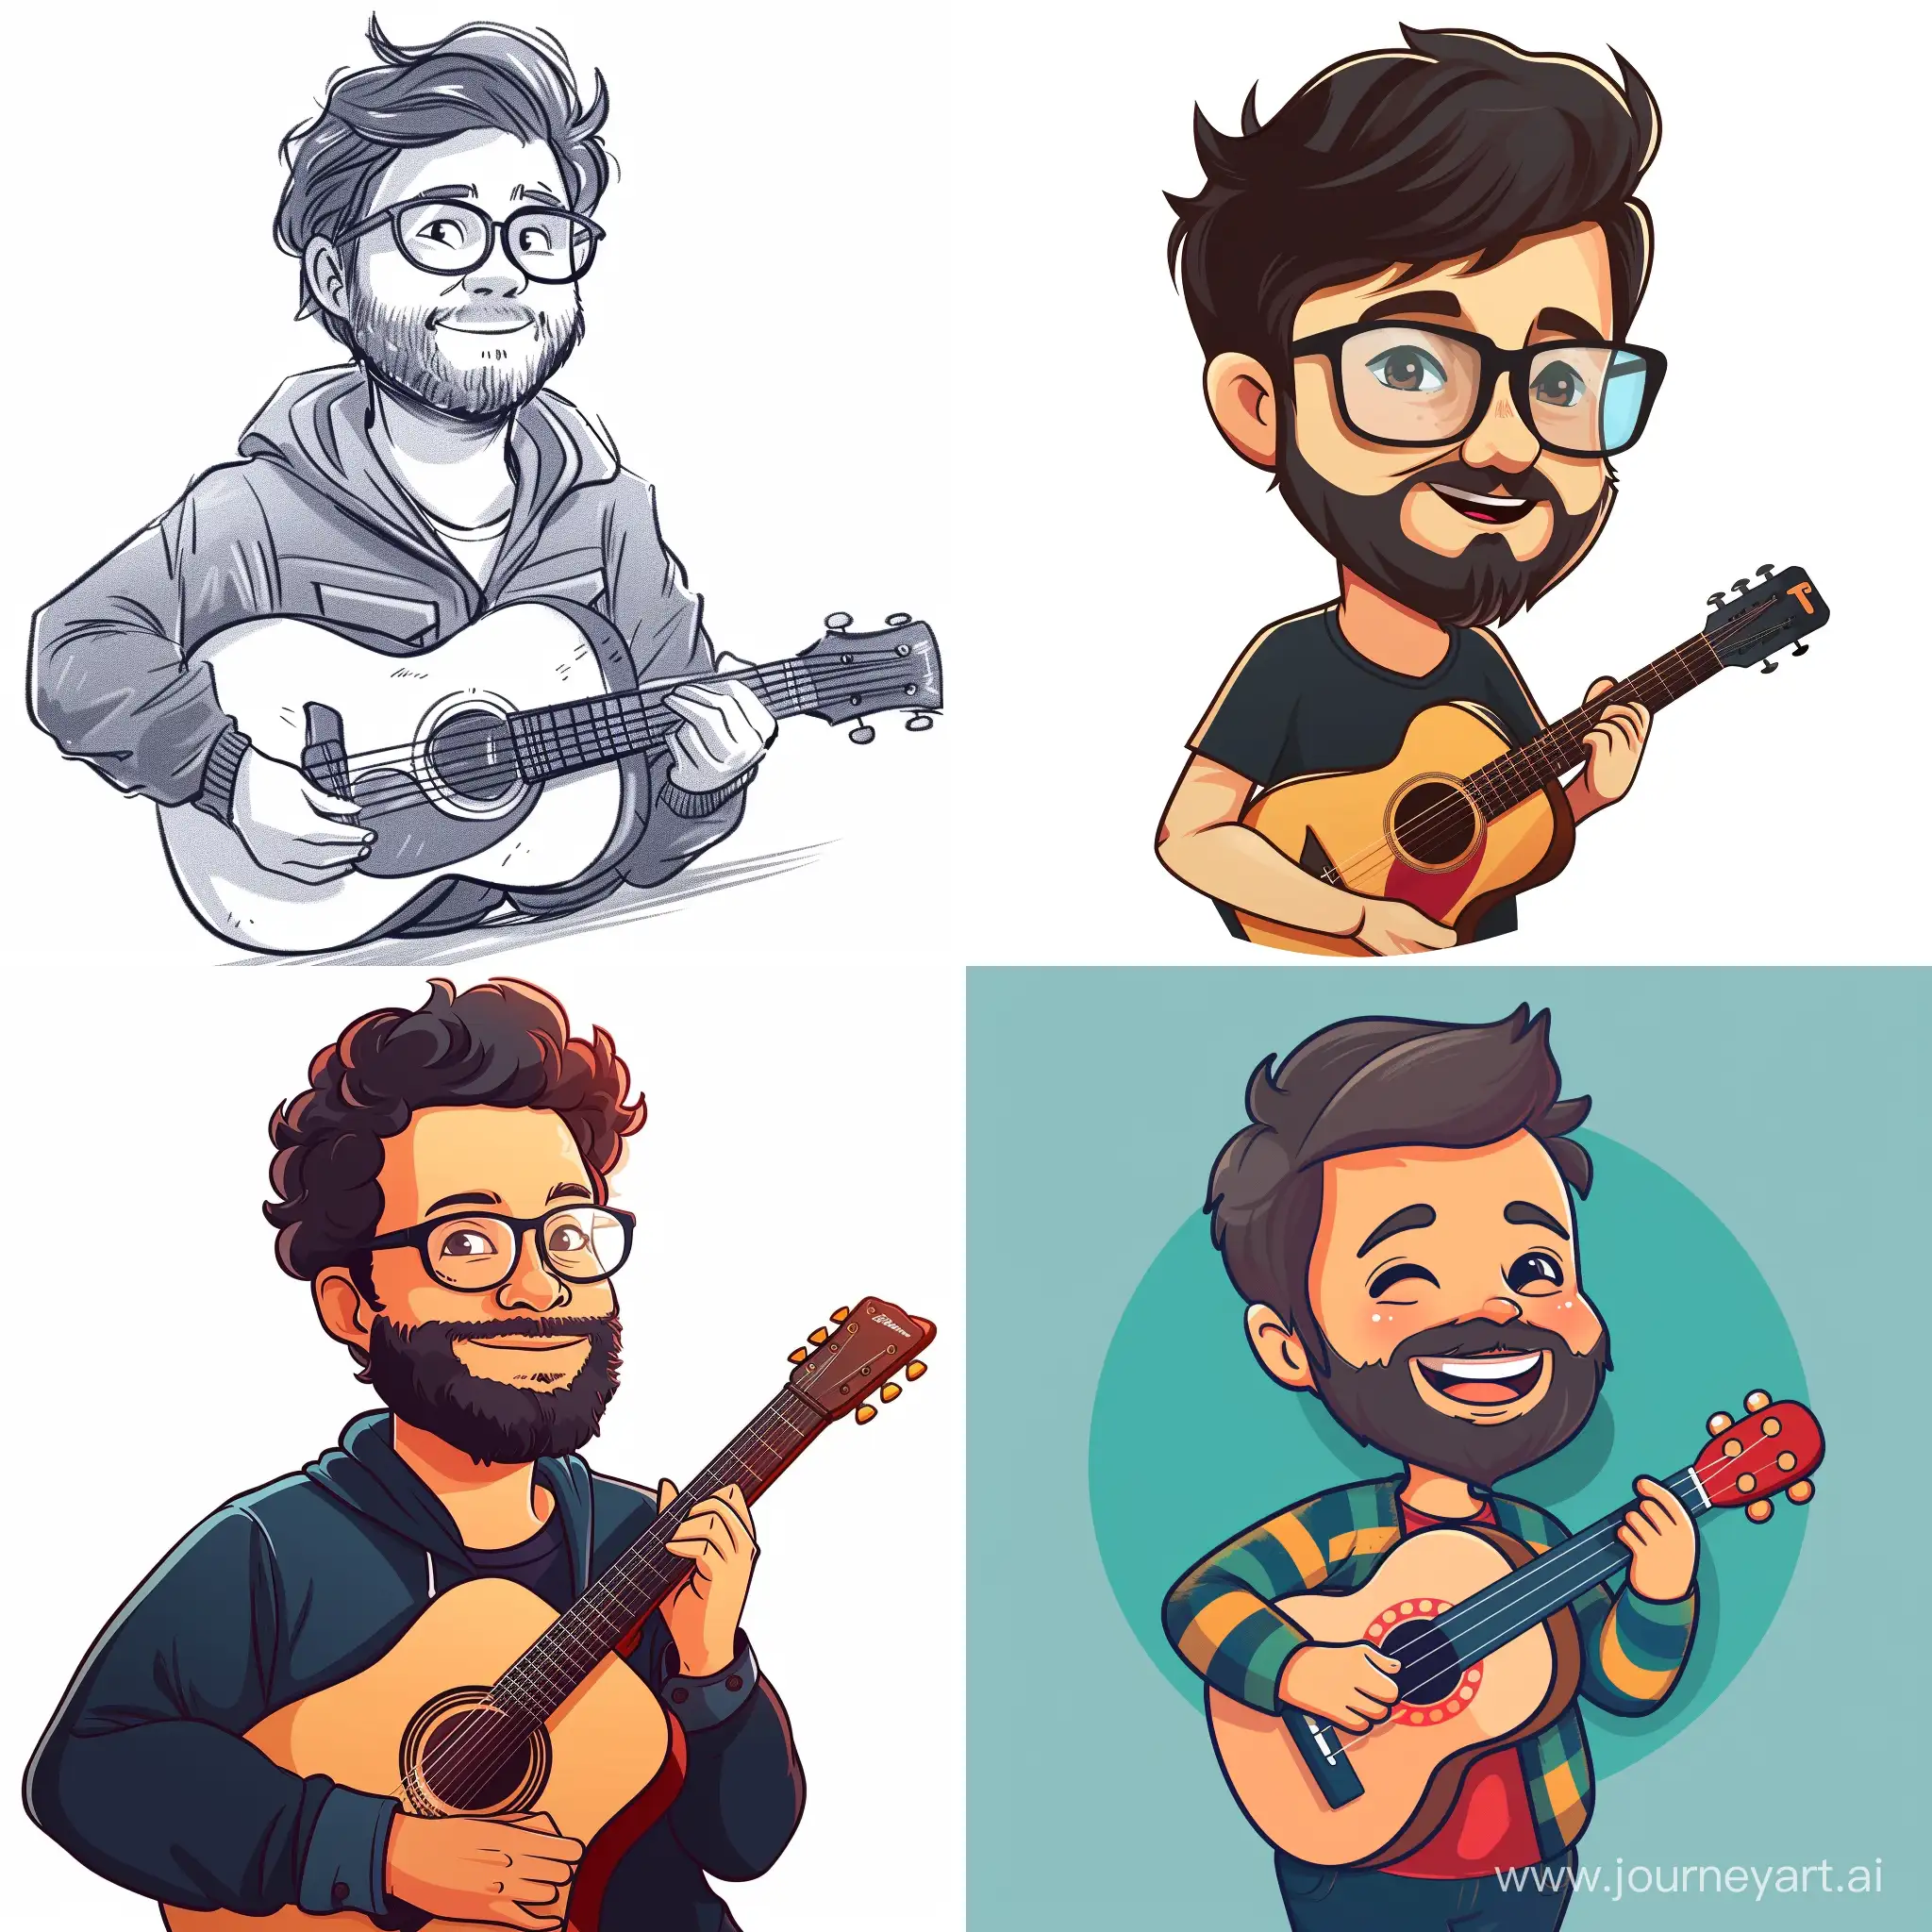 Draw an avatar for the YouTube channel, where the main theme of the channel is playing the guitar and pranking teachers with a guitar